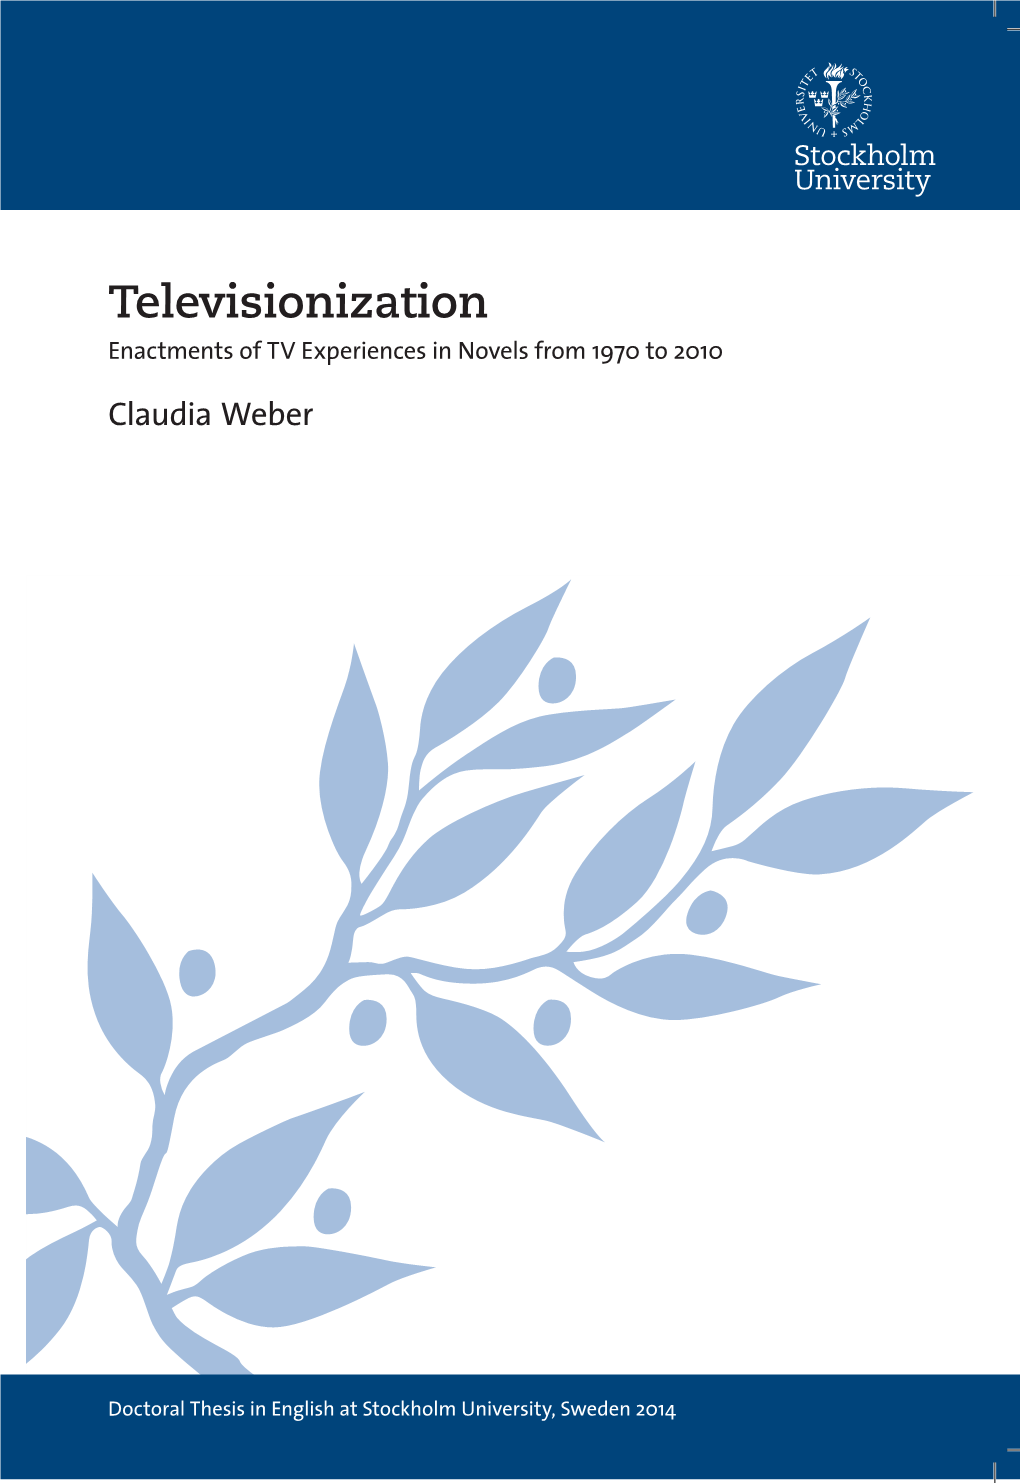 Televisionization: Enactments of TV Experiences in Novels from 1970 to 2010 Claudia Weber